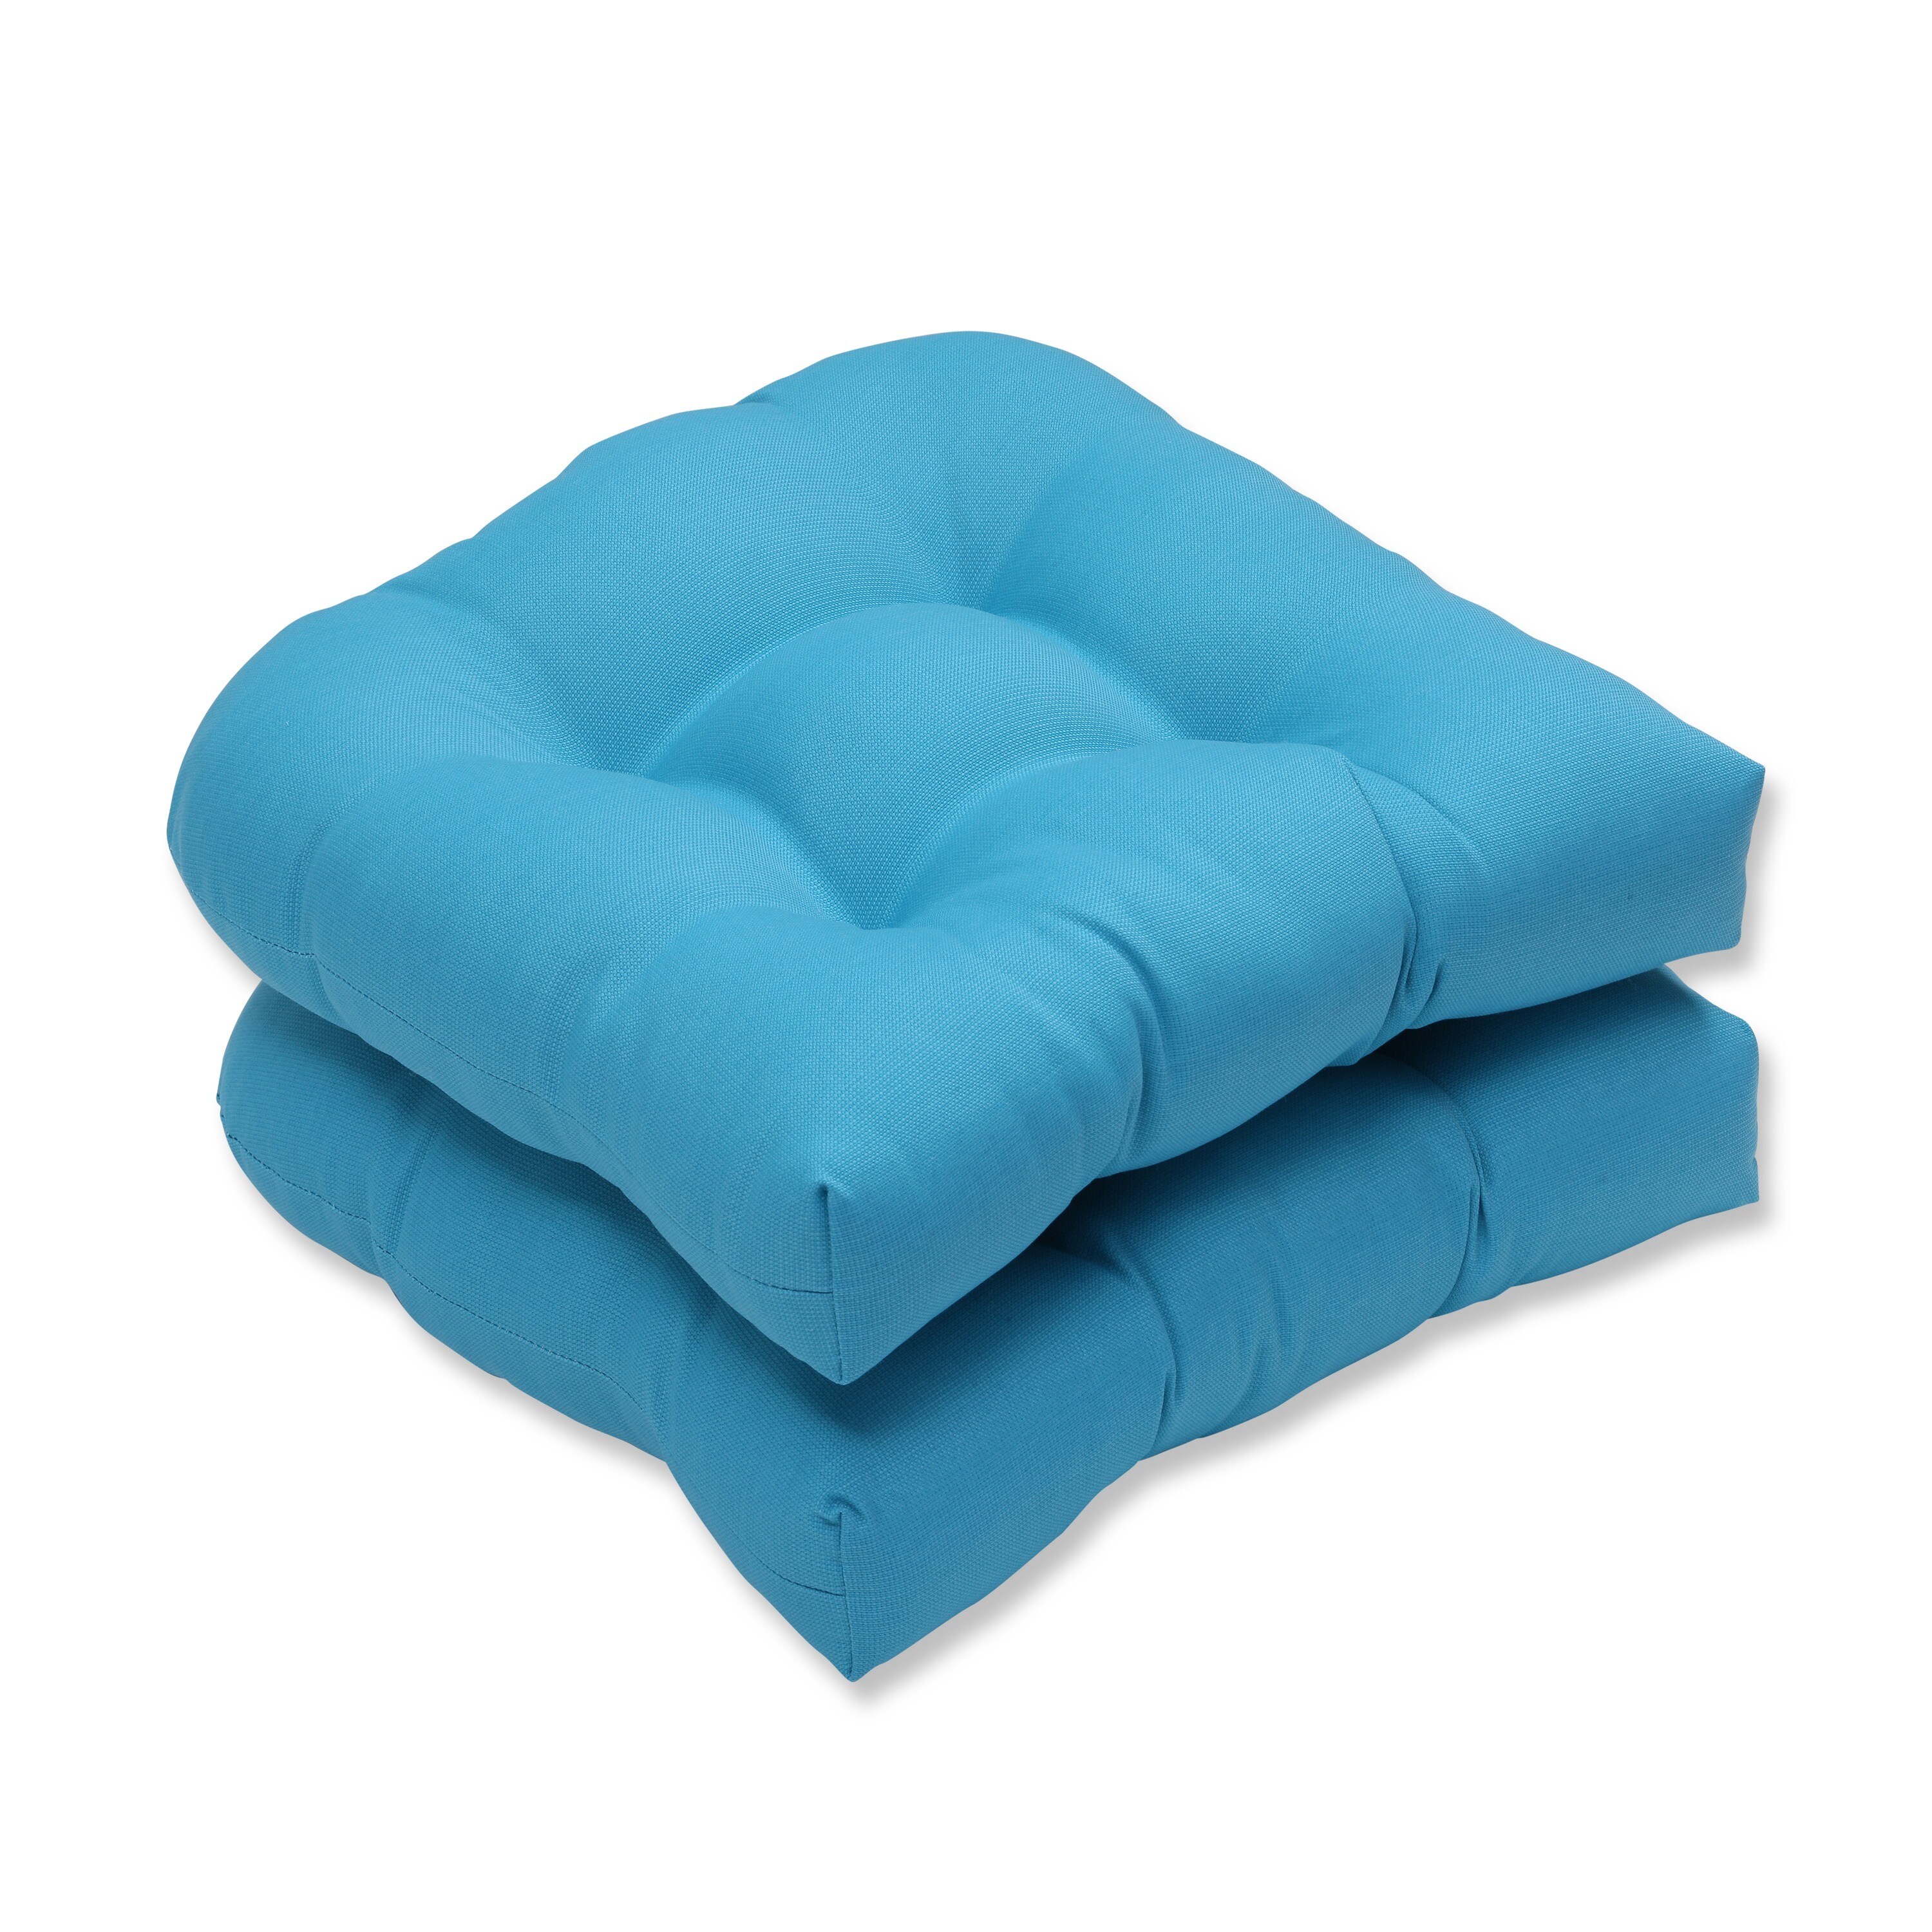 Pillow Perfect Outdoor Veranda Turquoise Wicker Seat Cushion (set Of 2) (TurquoiseClosure Sewn Seam ClosureEdging Knife EdgeUV Protection Yes Weather Resistant Yes Care instructions Spot Clean or Hand Wash Fabric with Mild Detergent. Dimensions 19 i